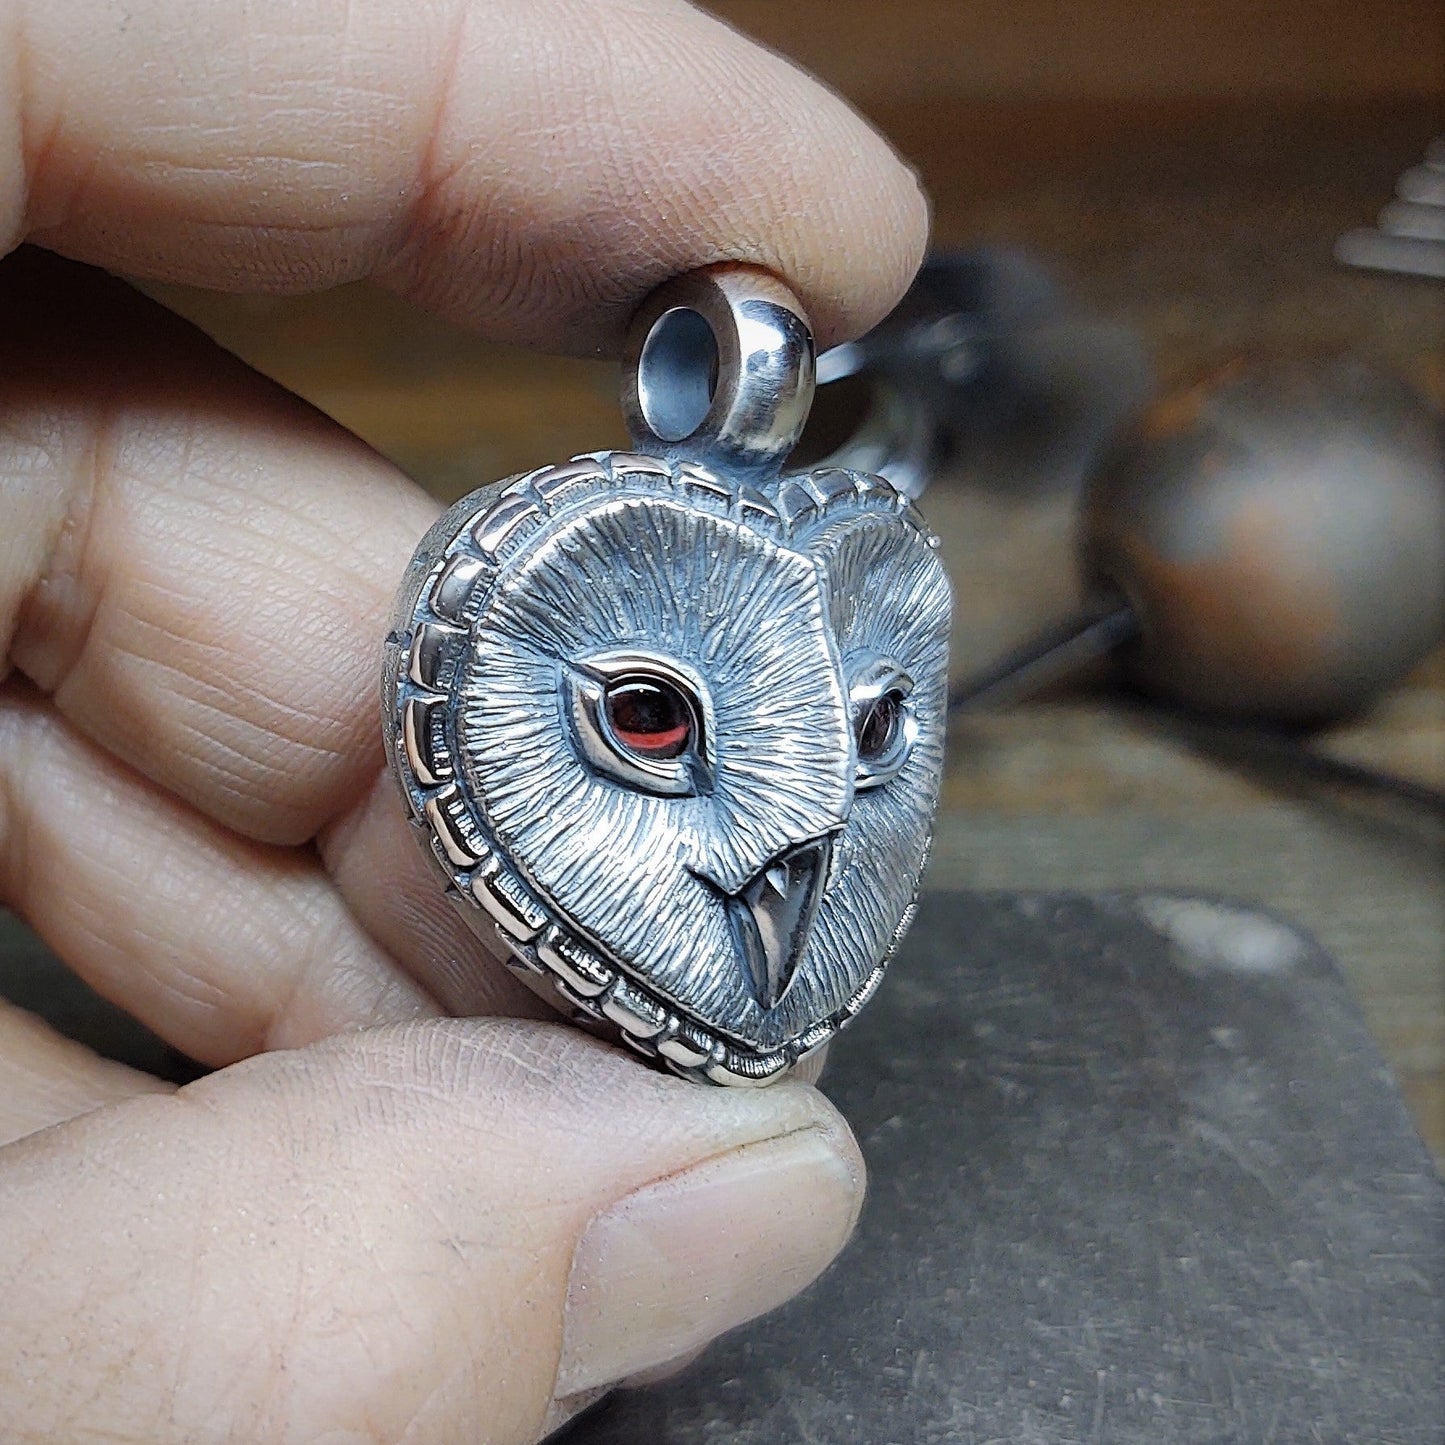 Barn Owl necklace, large sterling silver Barn Owl pendant with garnet eyes.  Hand made to order. © Adrian Ashley